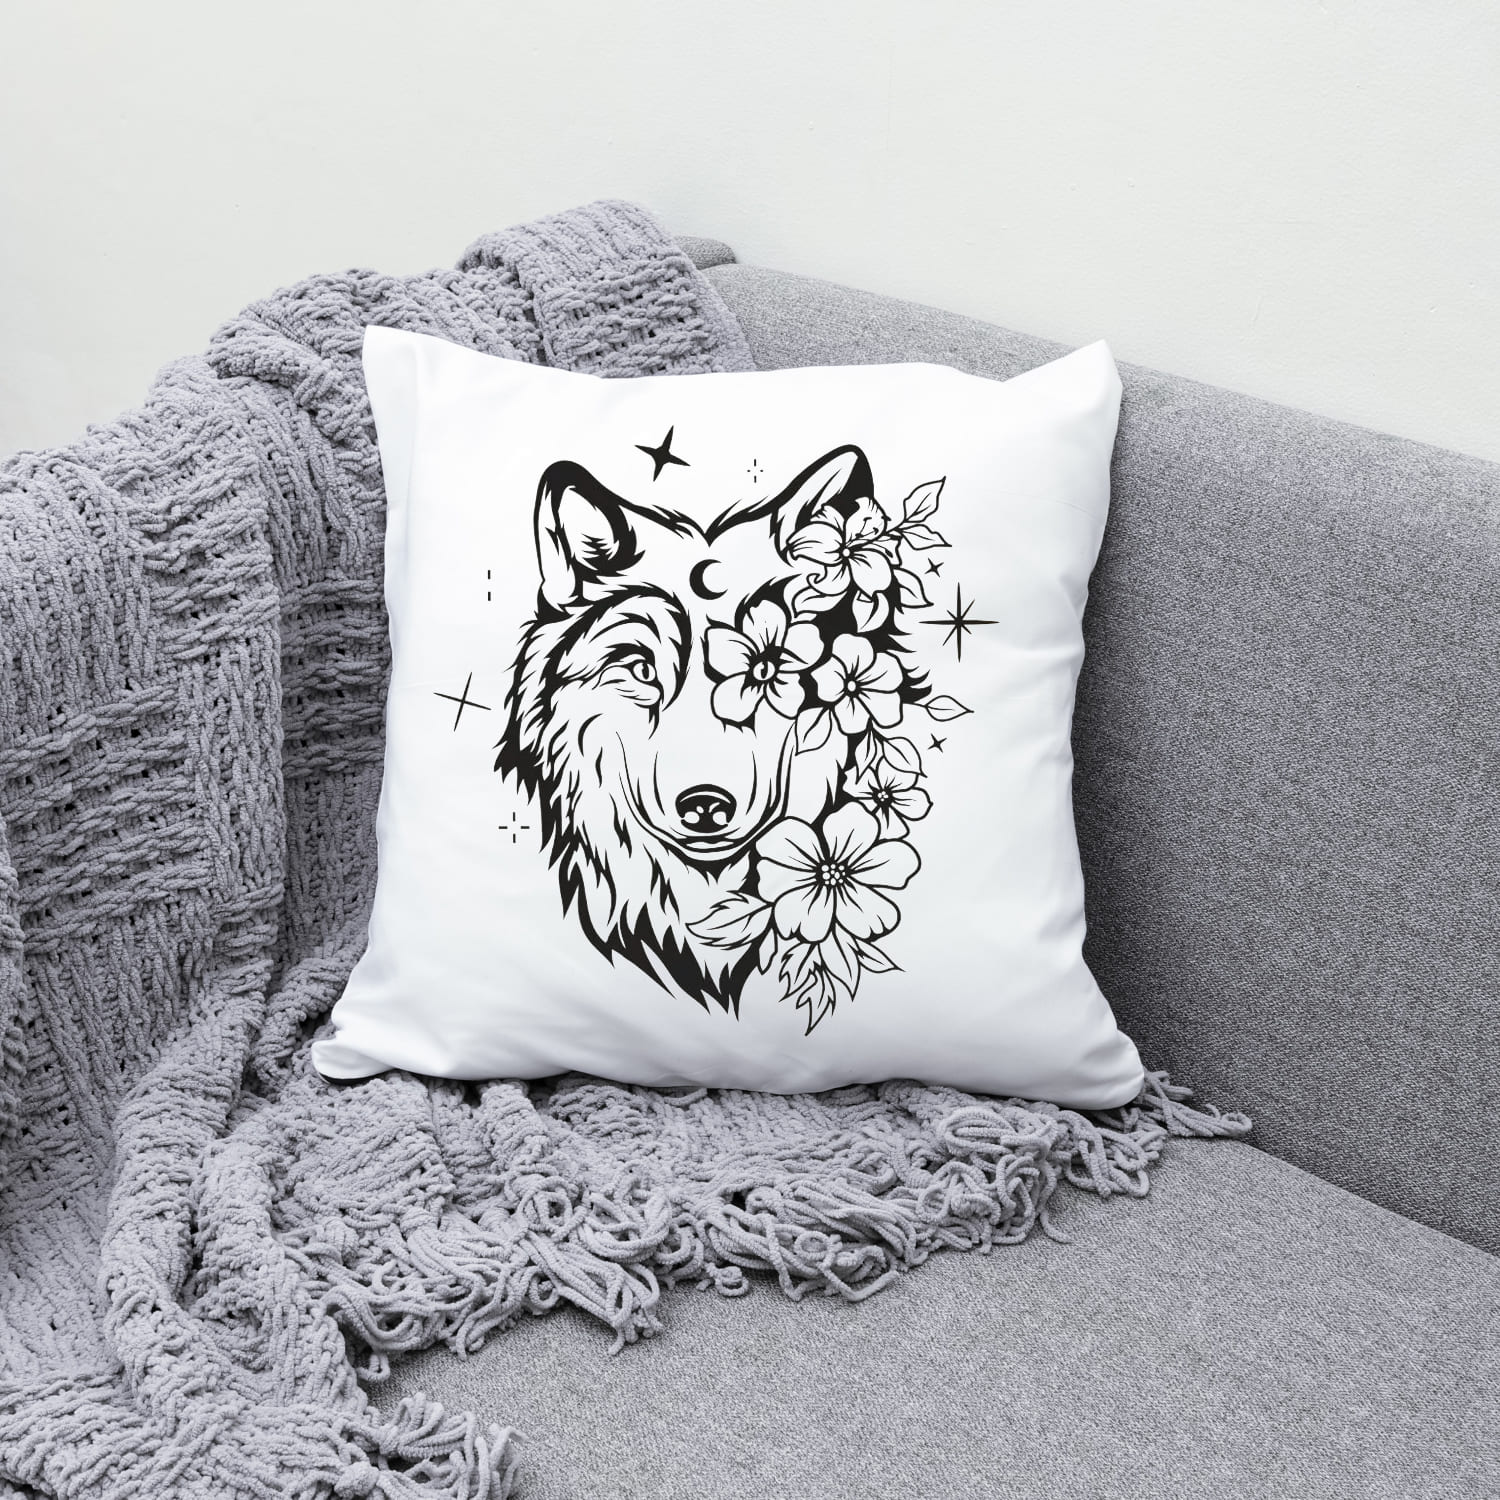 White pillow with a wolf and flowers on it.